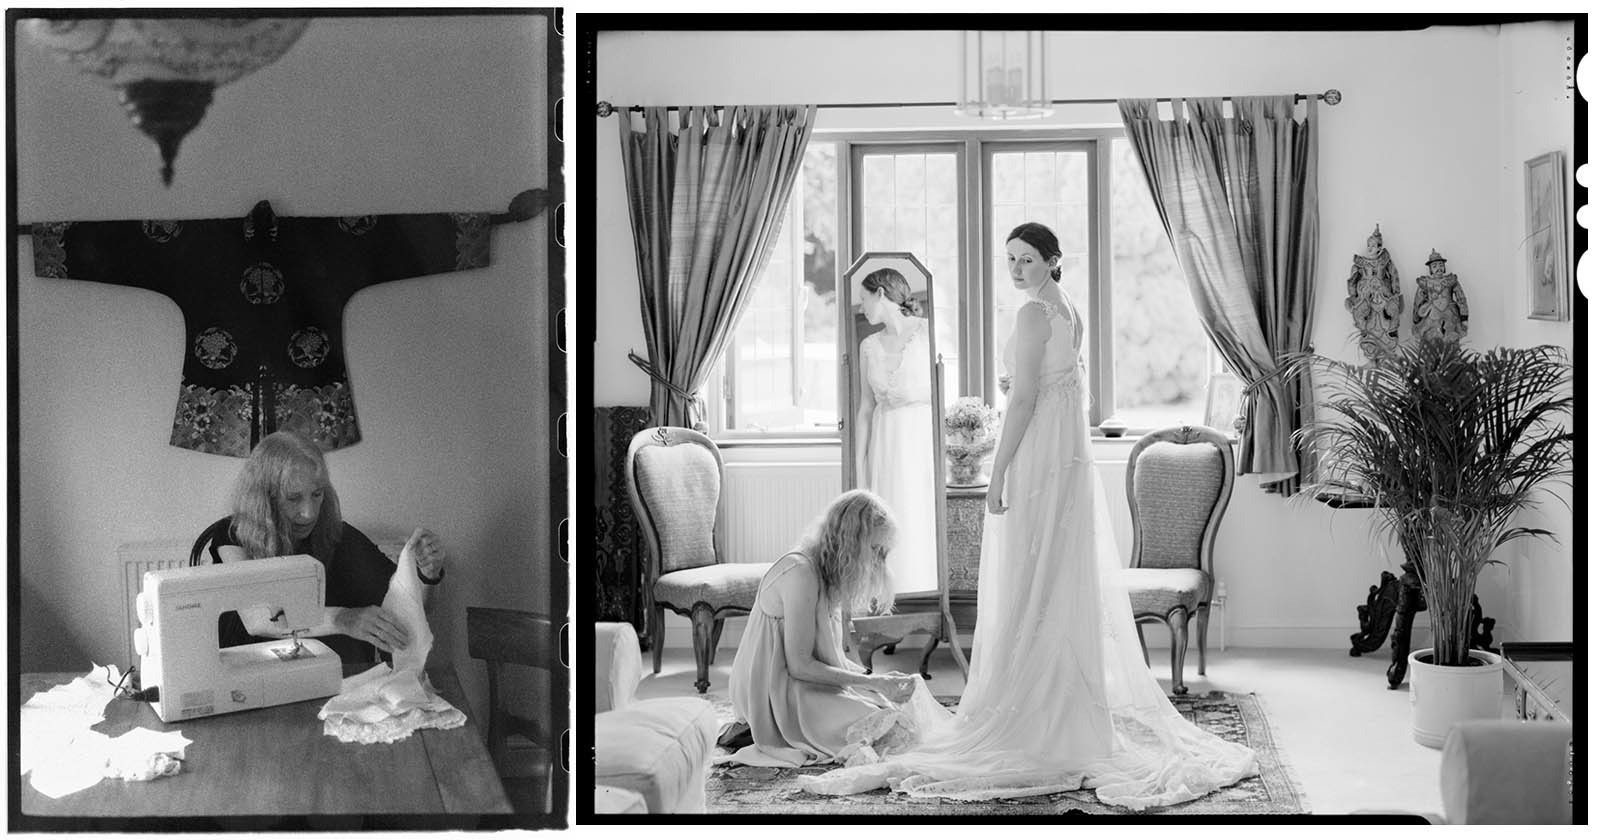 How I Documented the Making of a Wedding Dress